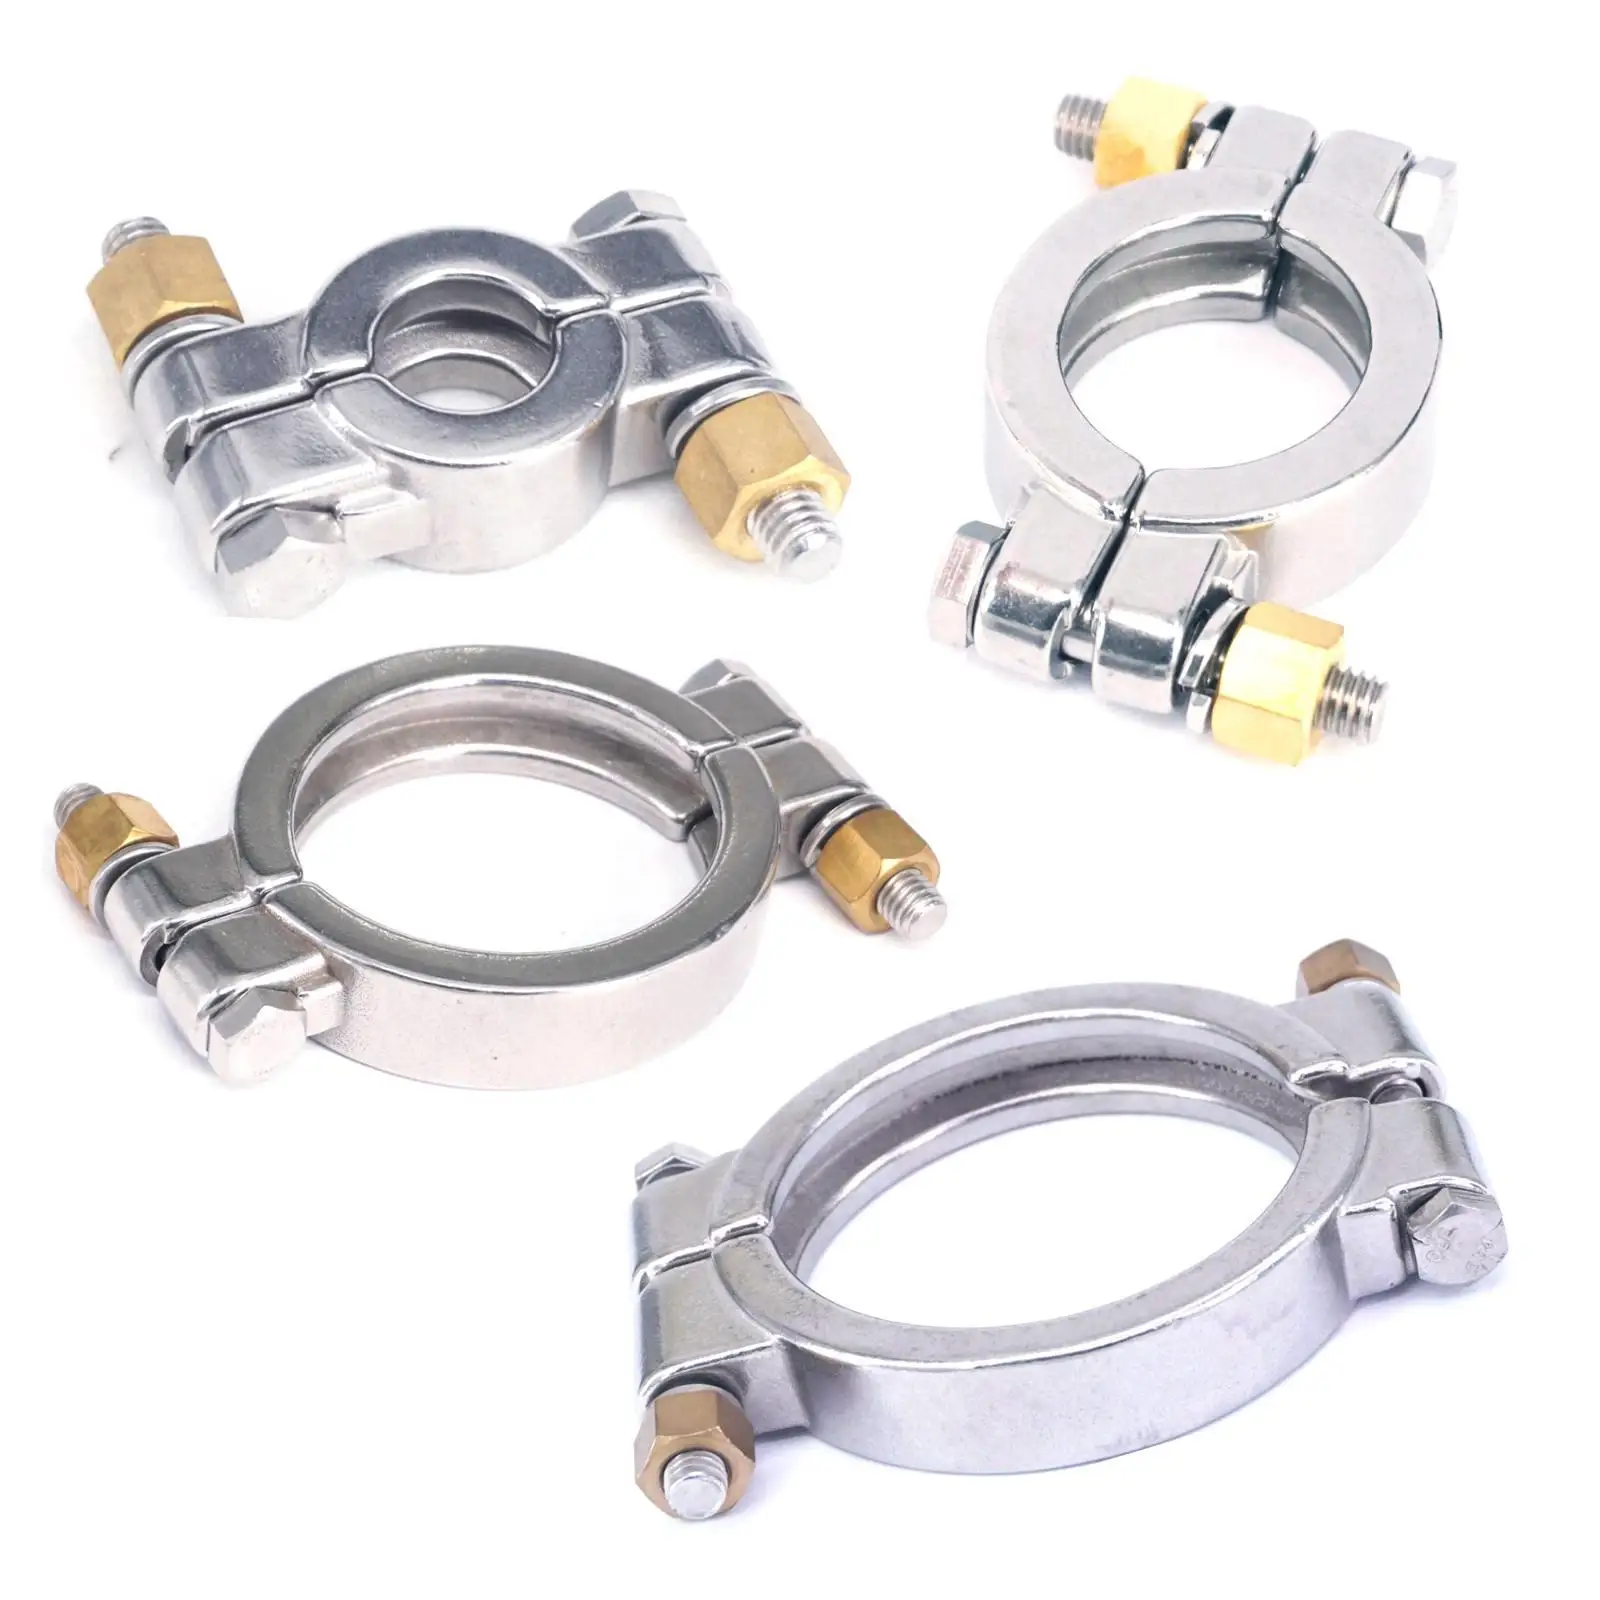 

High Pressure Tri Clamp 0.5" 1" 1.5" 2" 2.5" 3" 3.5" 4" 5" 6" 304 Stainless Steel Sanitary Ferrule Tri-Clover Clamp Holder